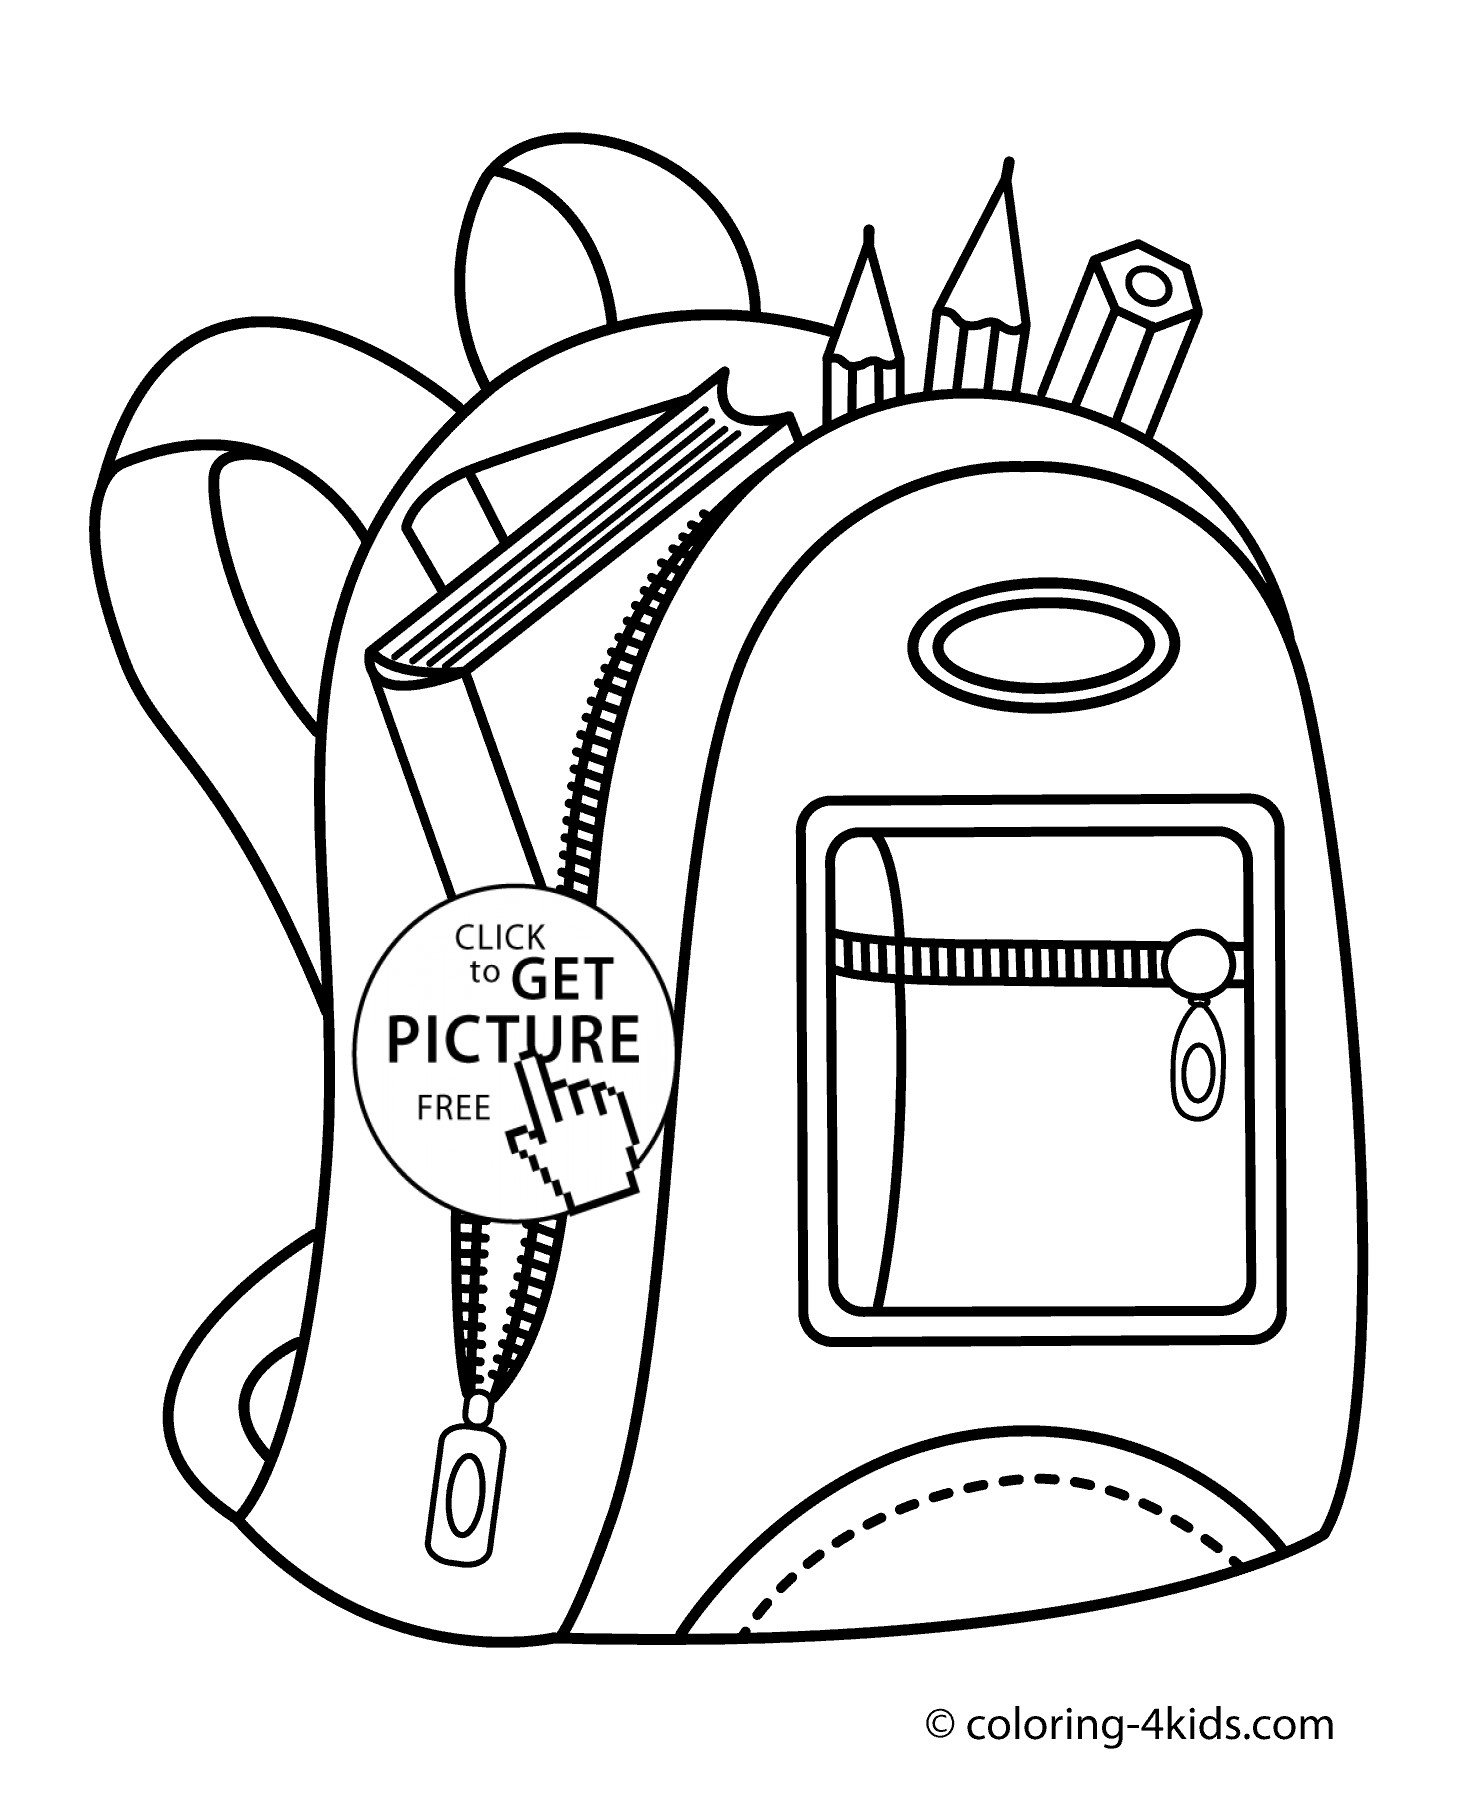 Coloring Book Bag
 Backpack for school coloring page for kids printable free